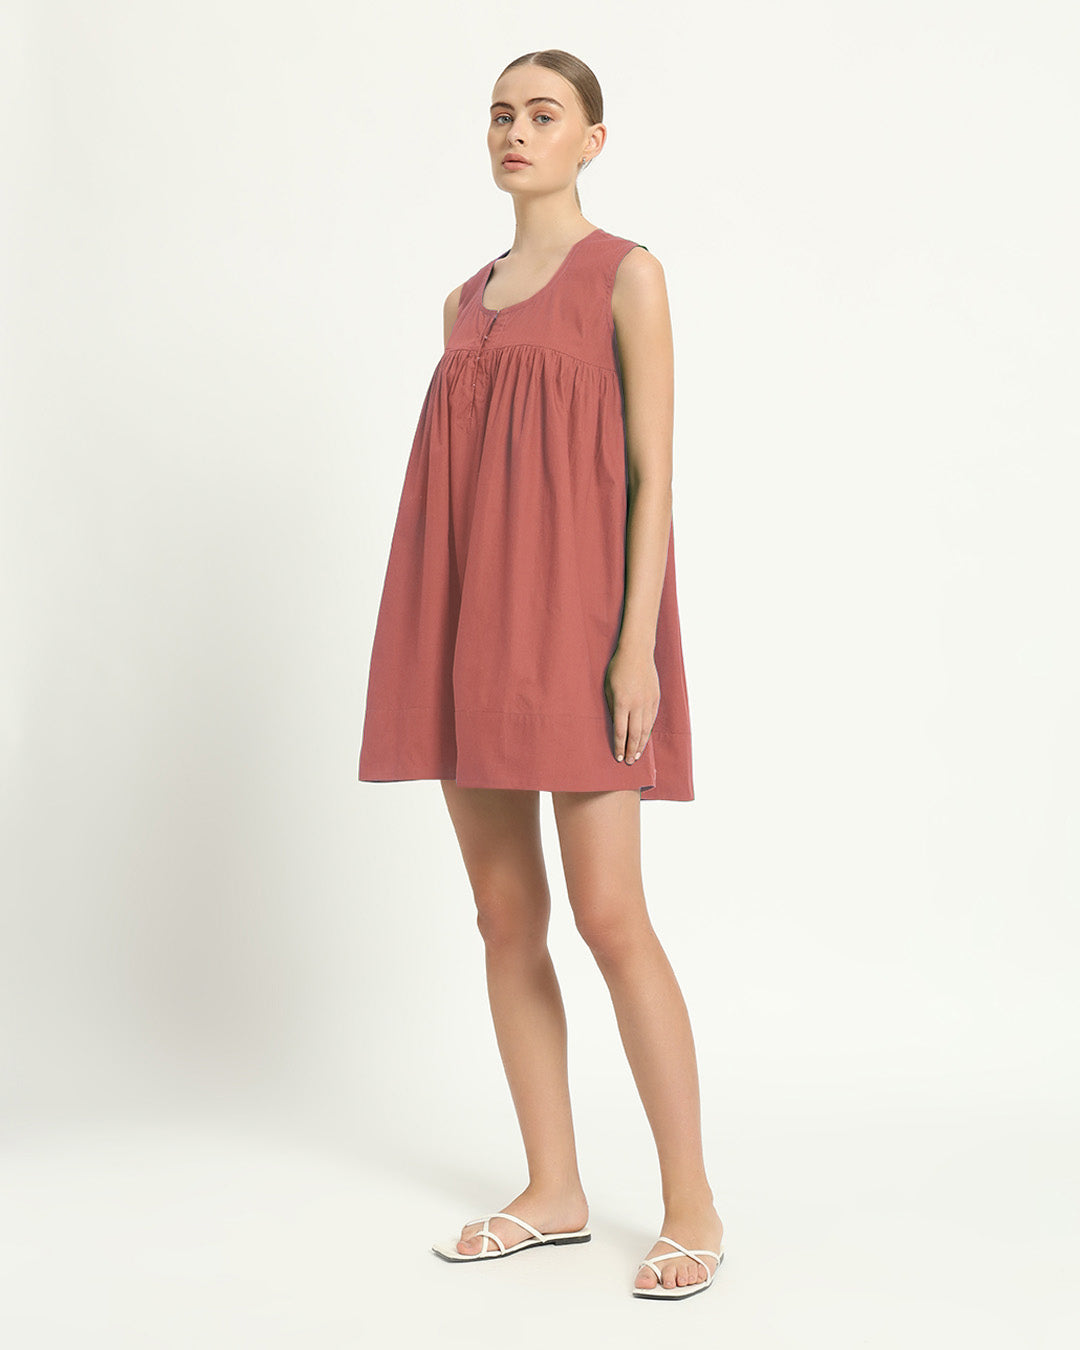 The Jois Ivory Pink Cotton Dress